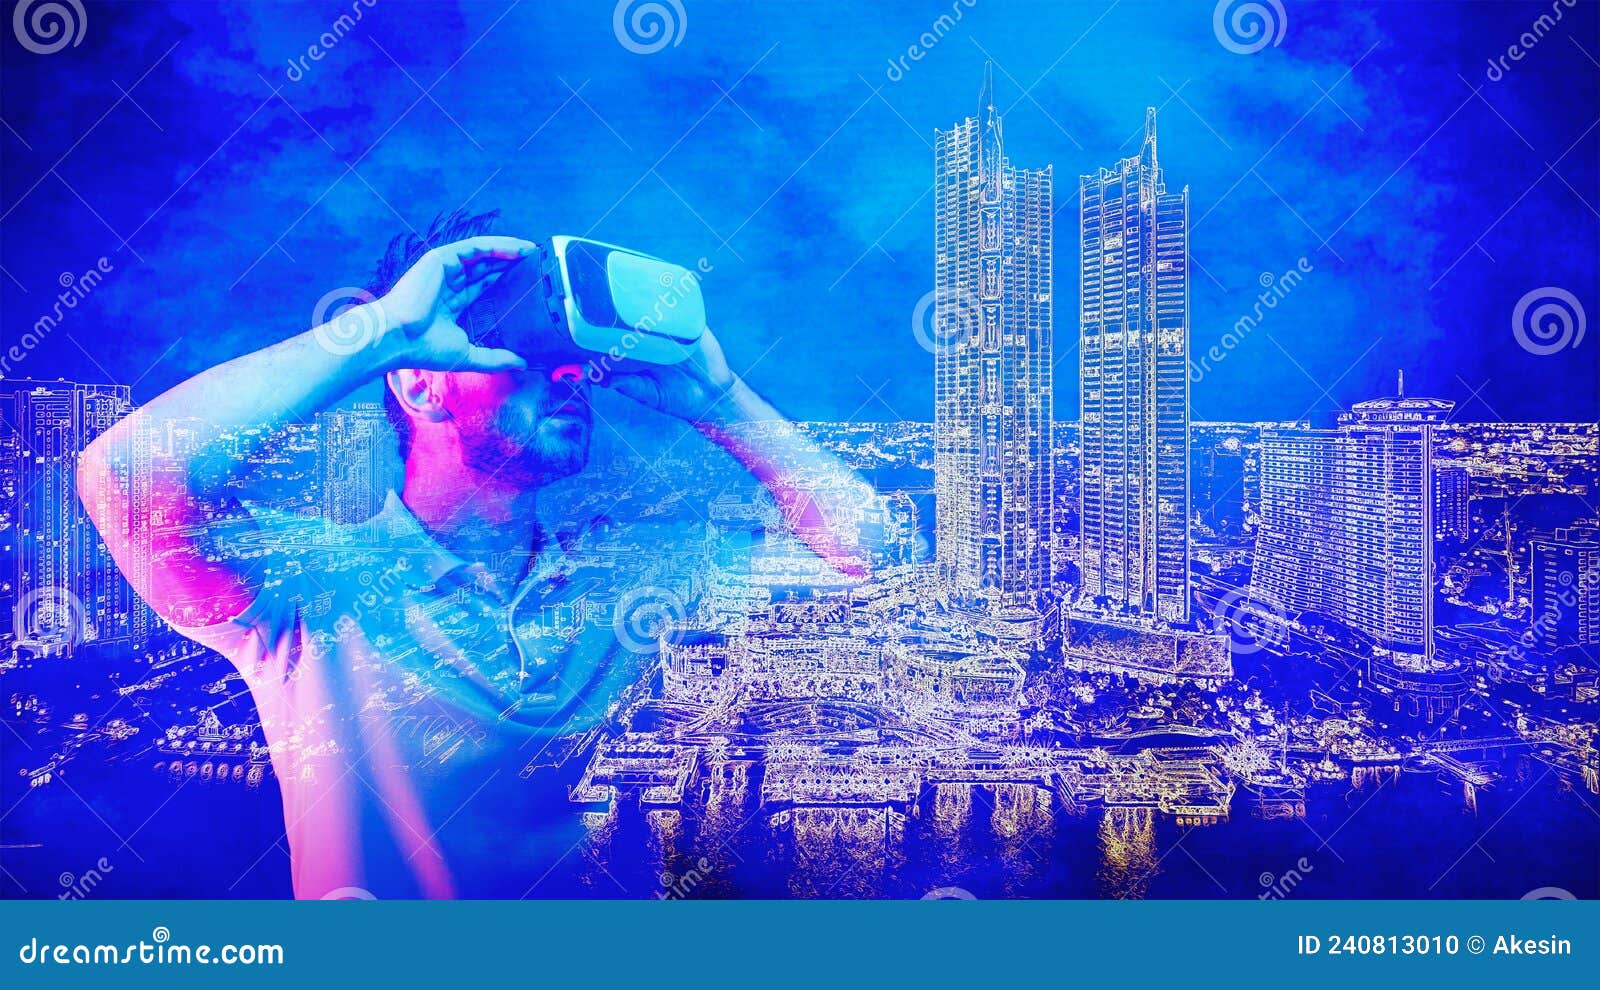 metaverse concept of man with vr headset in virtual city from ar and vr technology